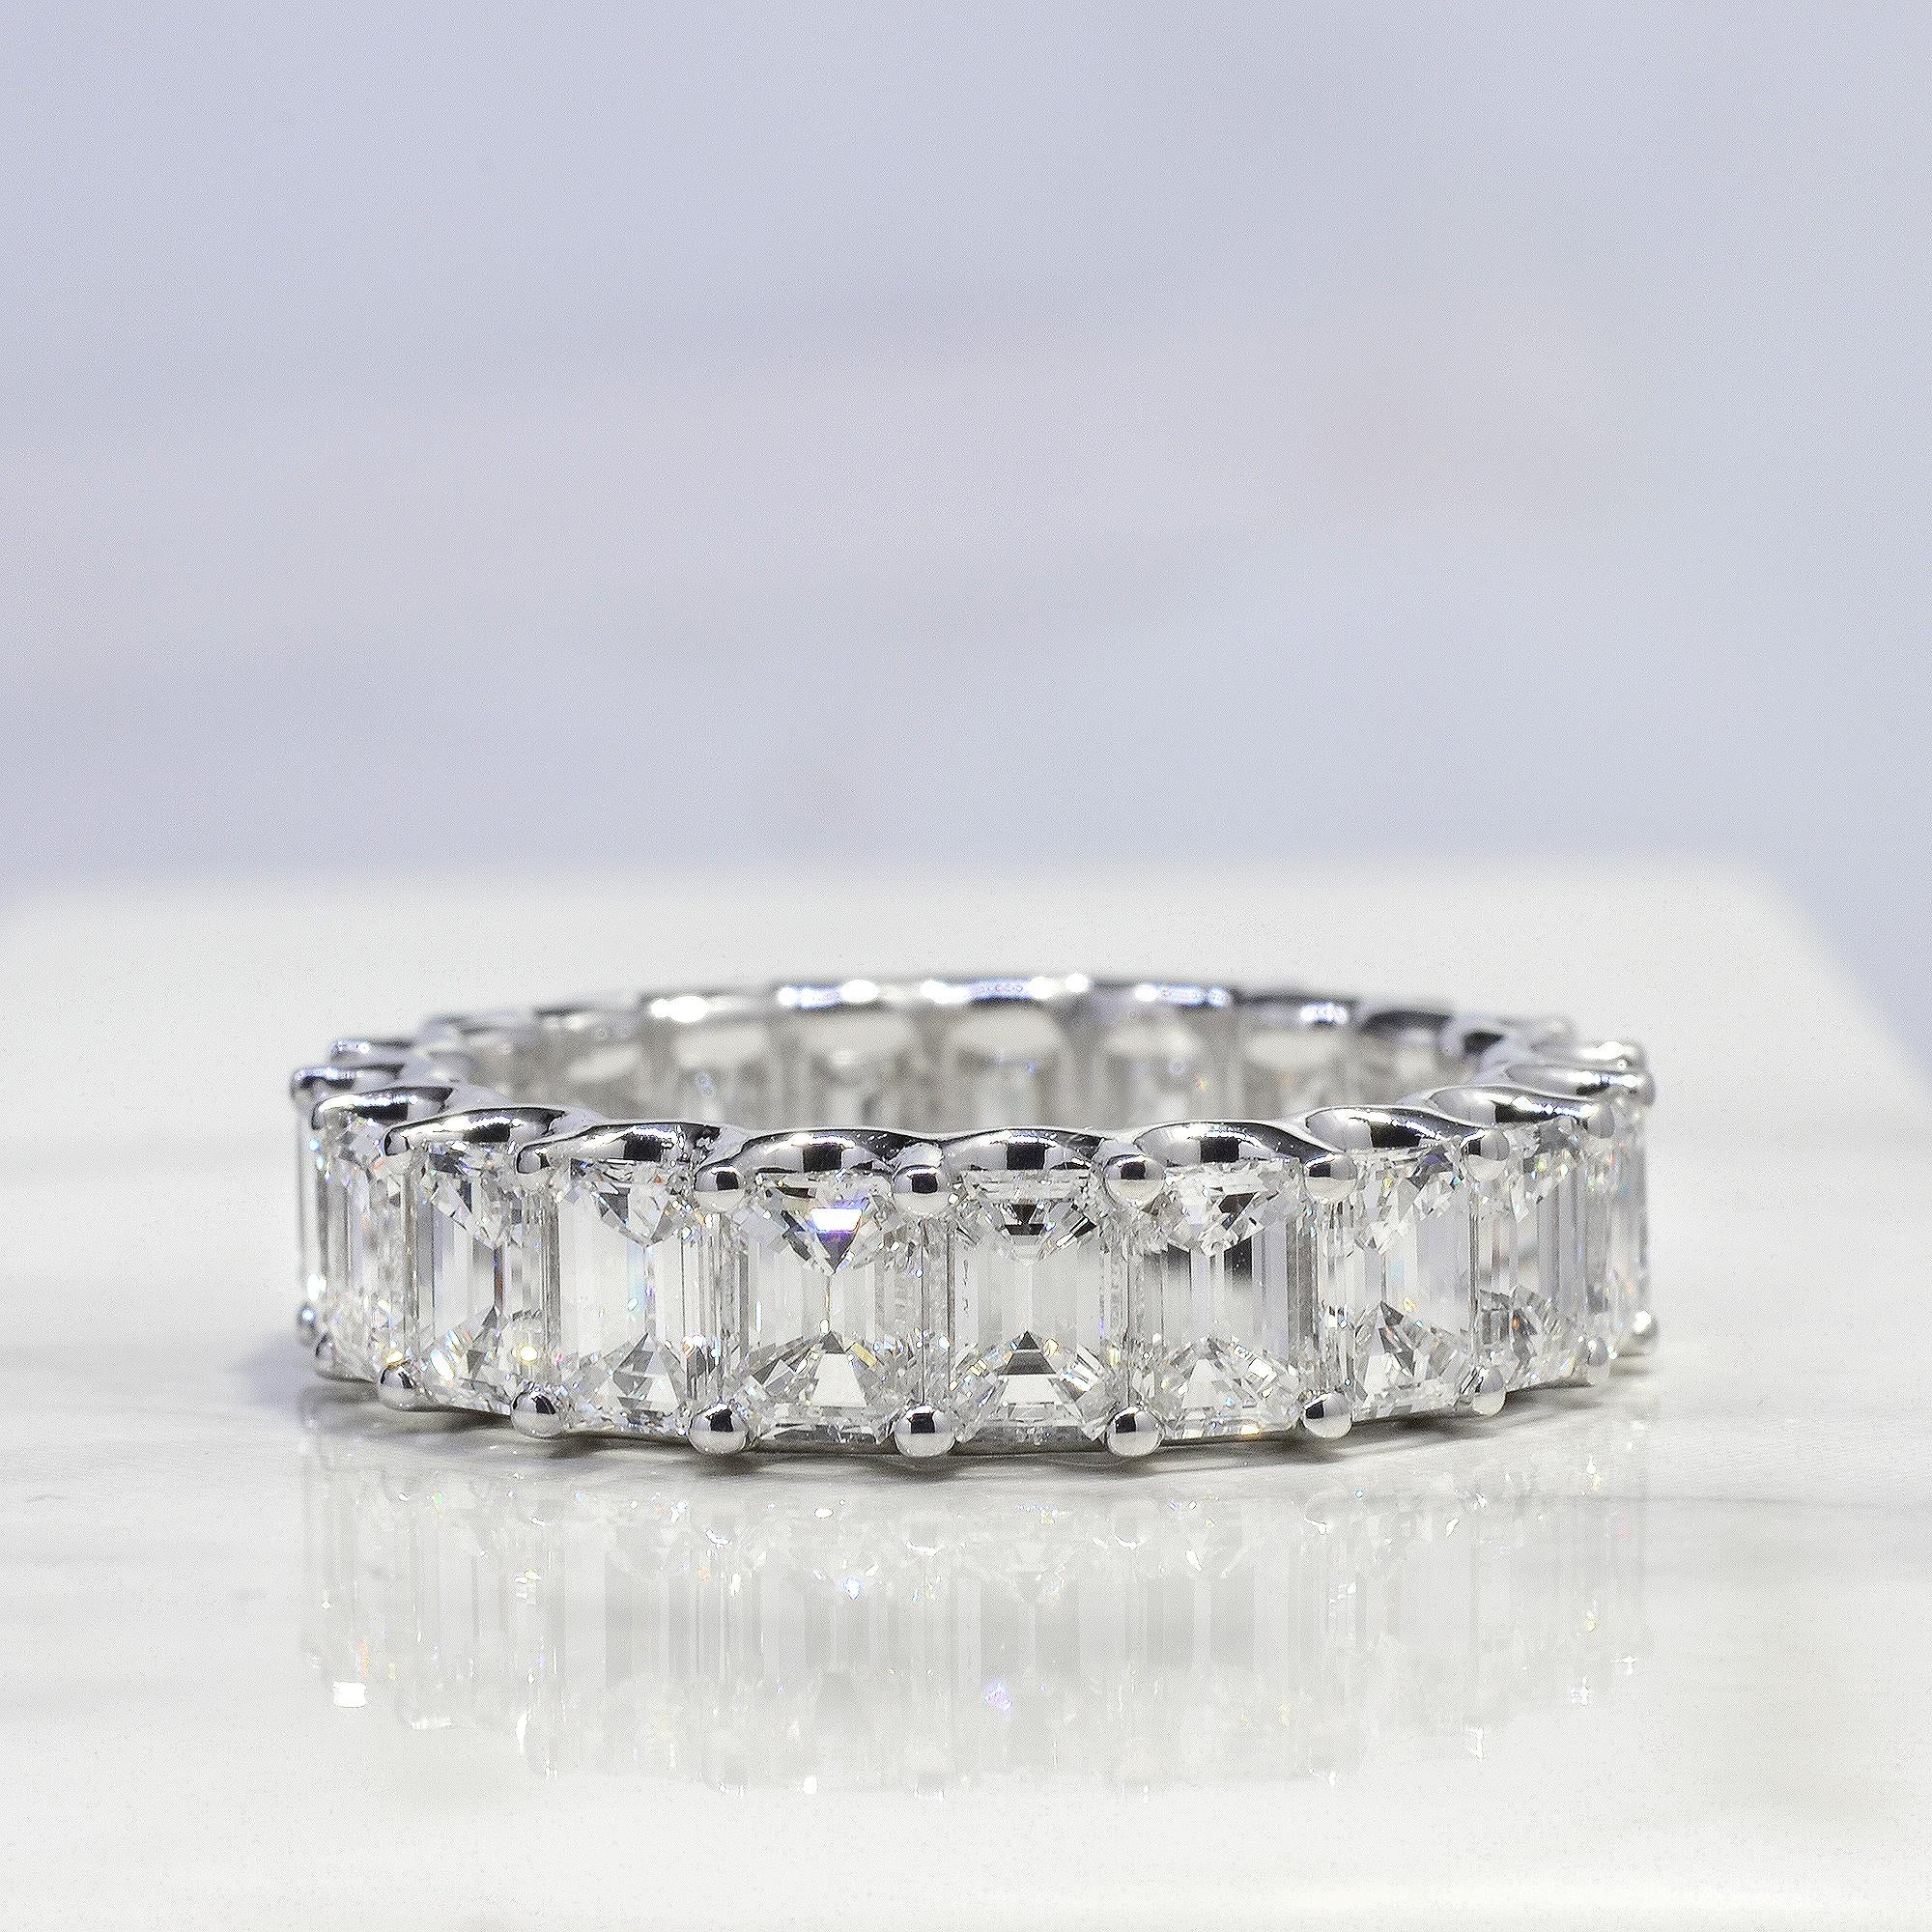 For Sale:  3 Carats Emerald Cut Eternity Band Shared Prong Design F-G Color VS1 Clarity 14k 6